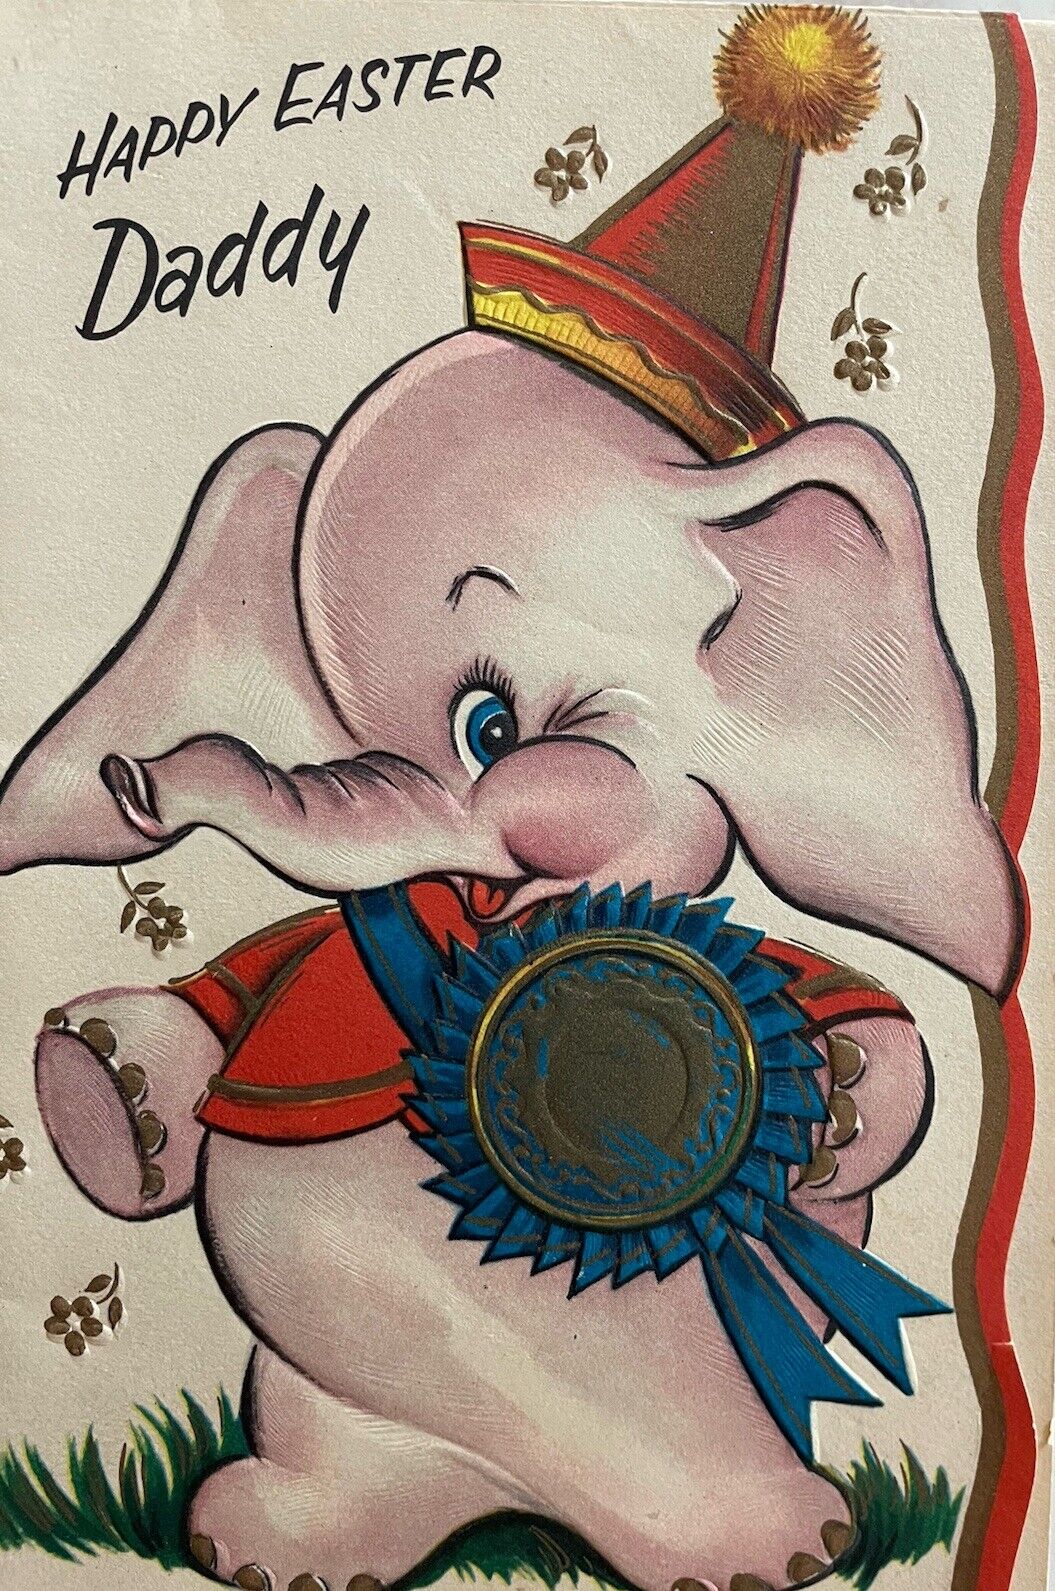 NOS Vtg Happy Easter Daddy Card Purple Baby Elephant Blue Ribbon UNUSED 50s